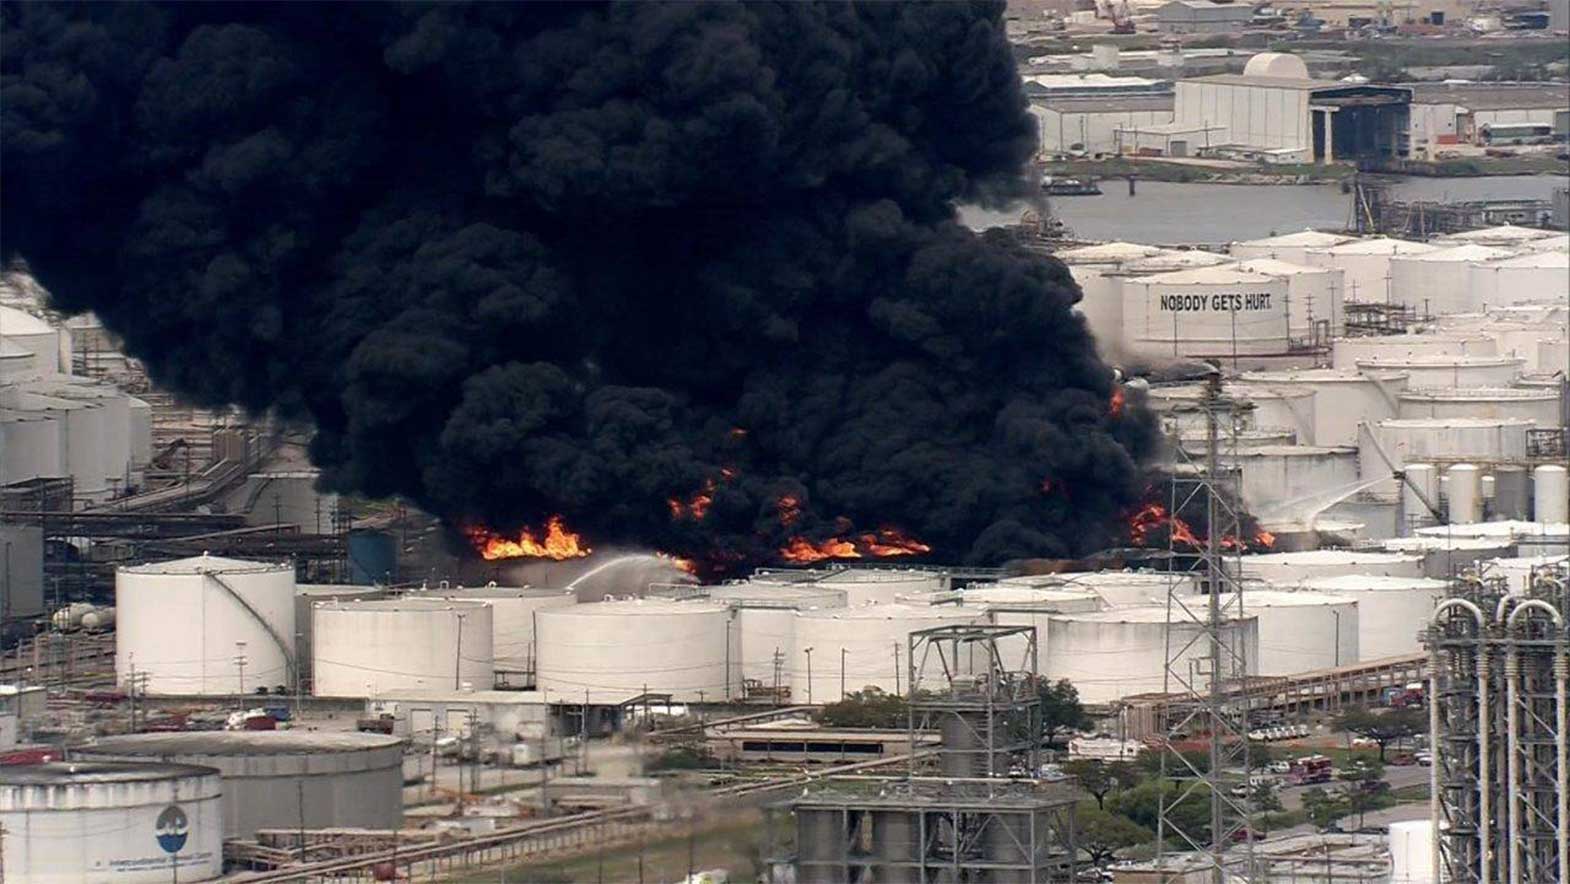 US Chemical Plant Fire Smoke Hovers Over Houston1570 x 884